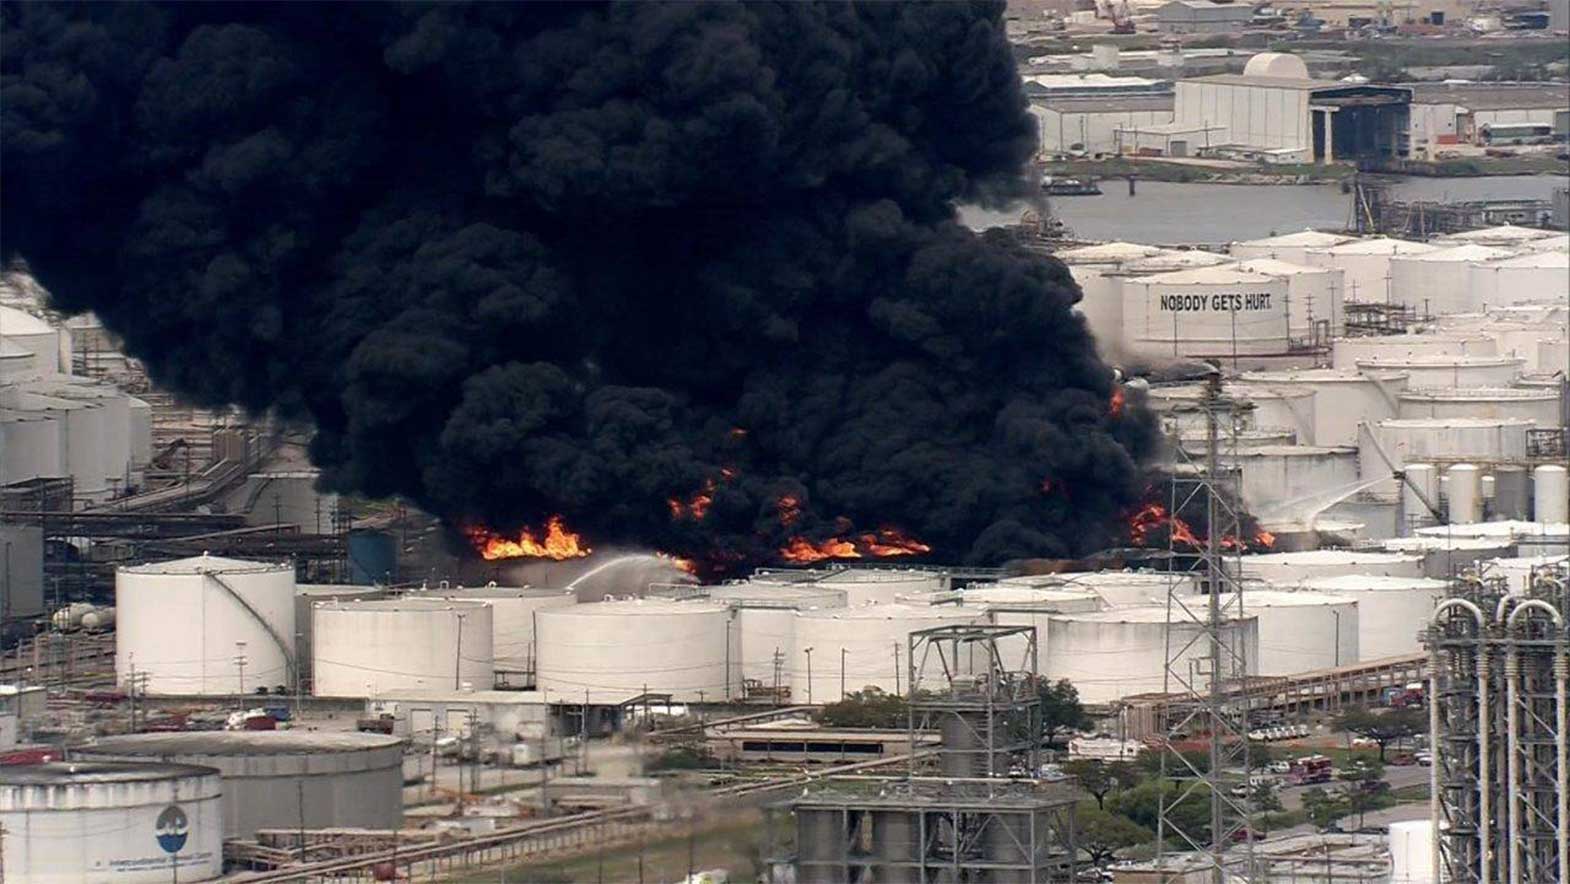 US Chemical Plant Fire Smoke Hovers Over Houston1570 x 884